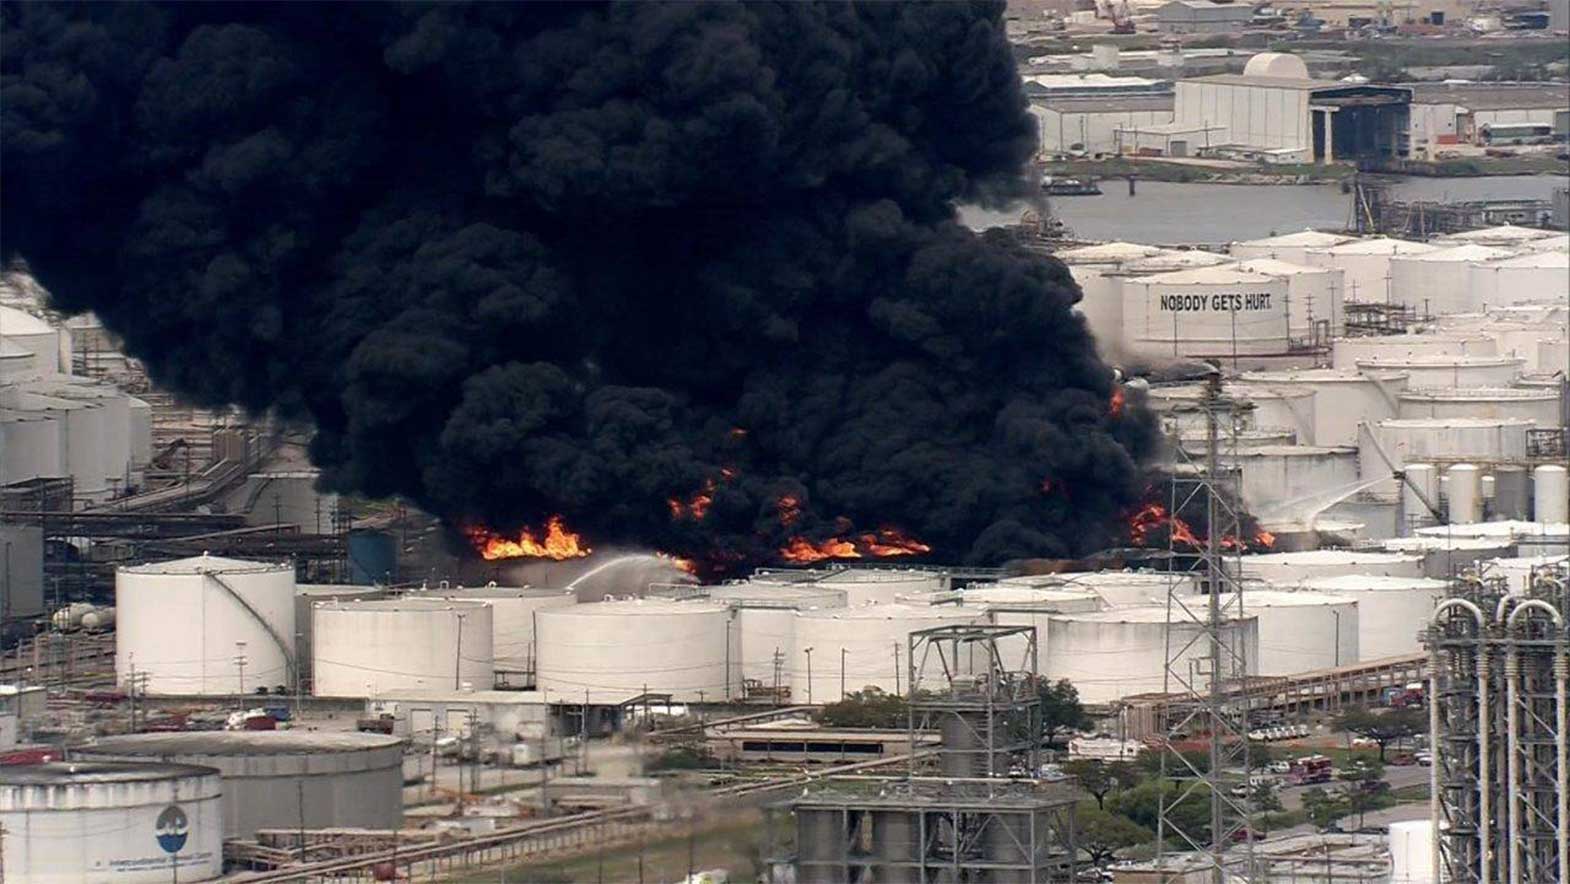 US Chemical Plant Fire Smoke Hovers Over Houston1570 x 884